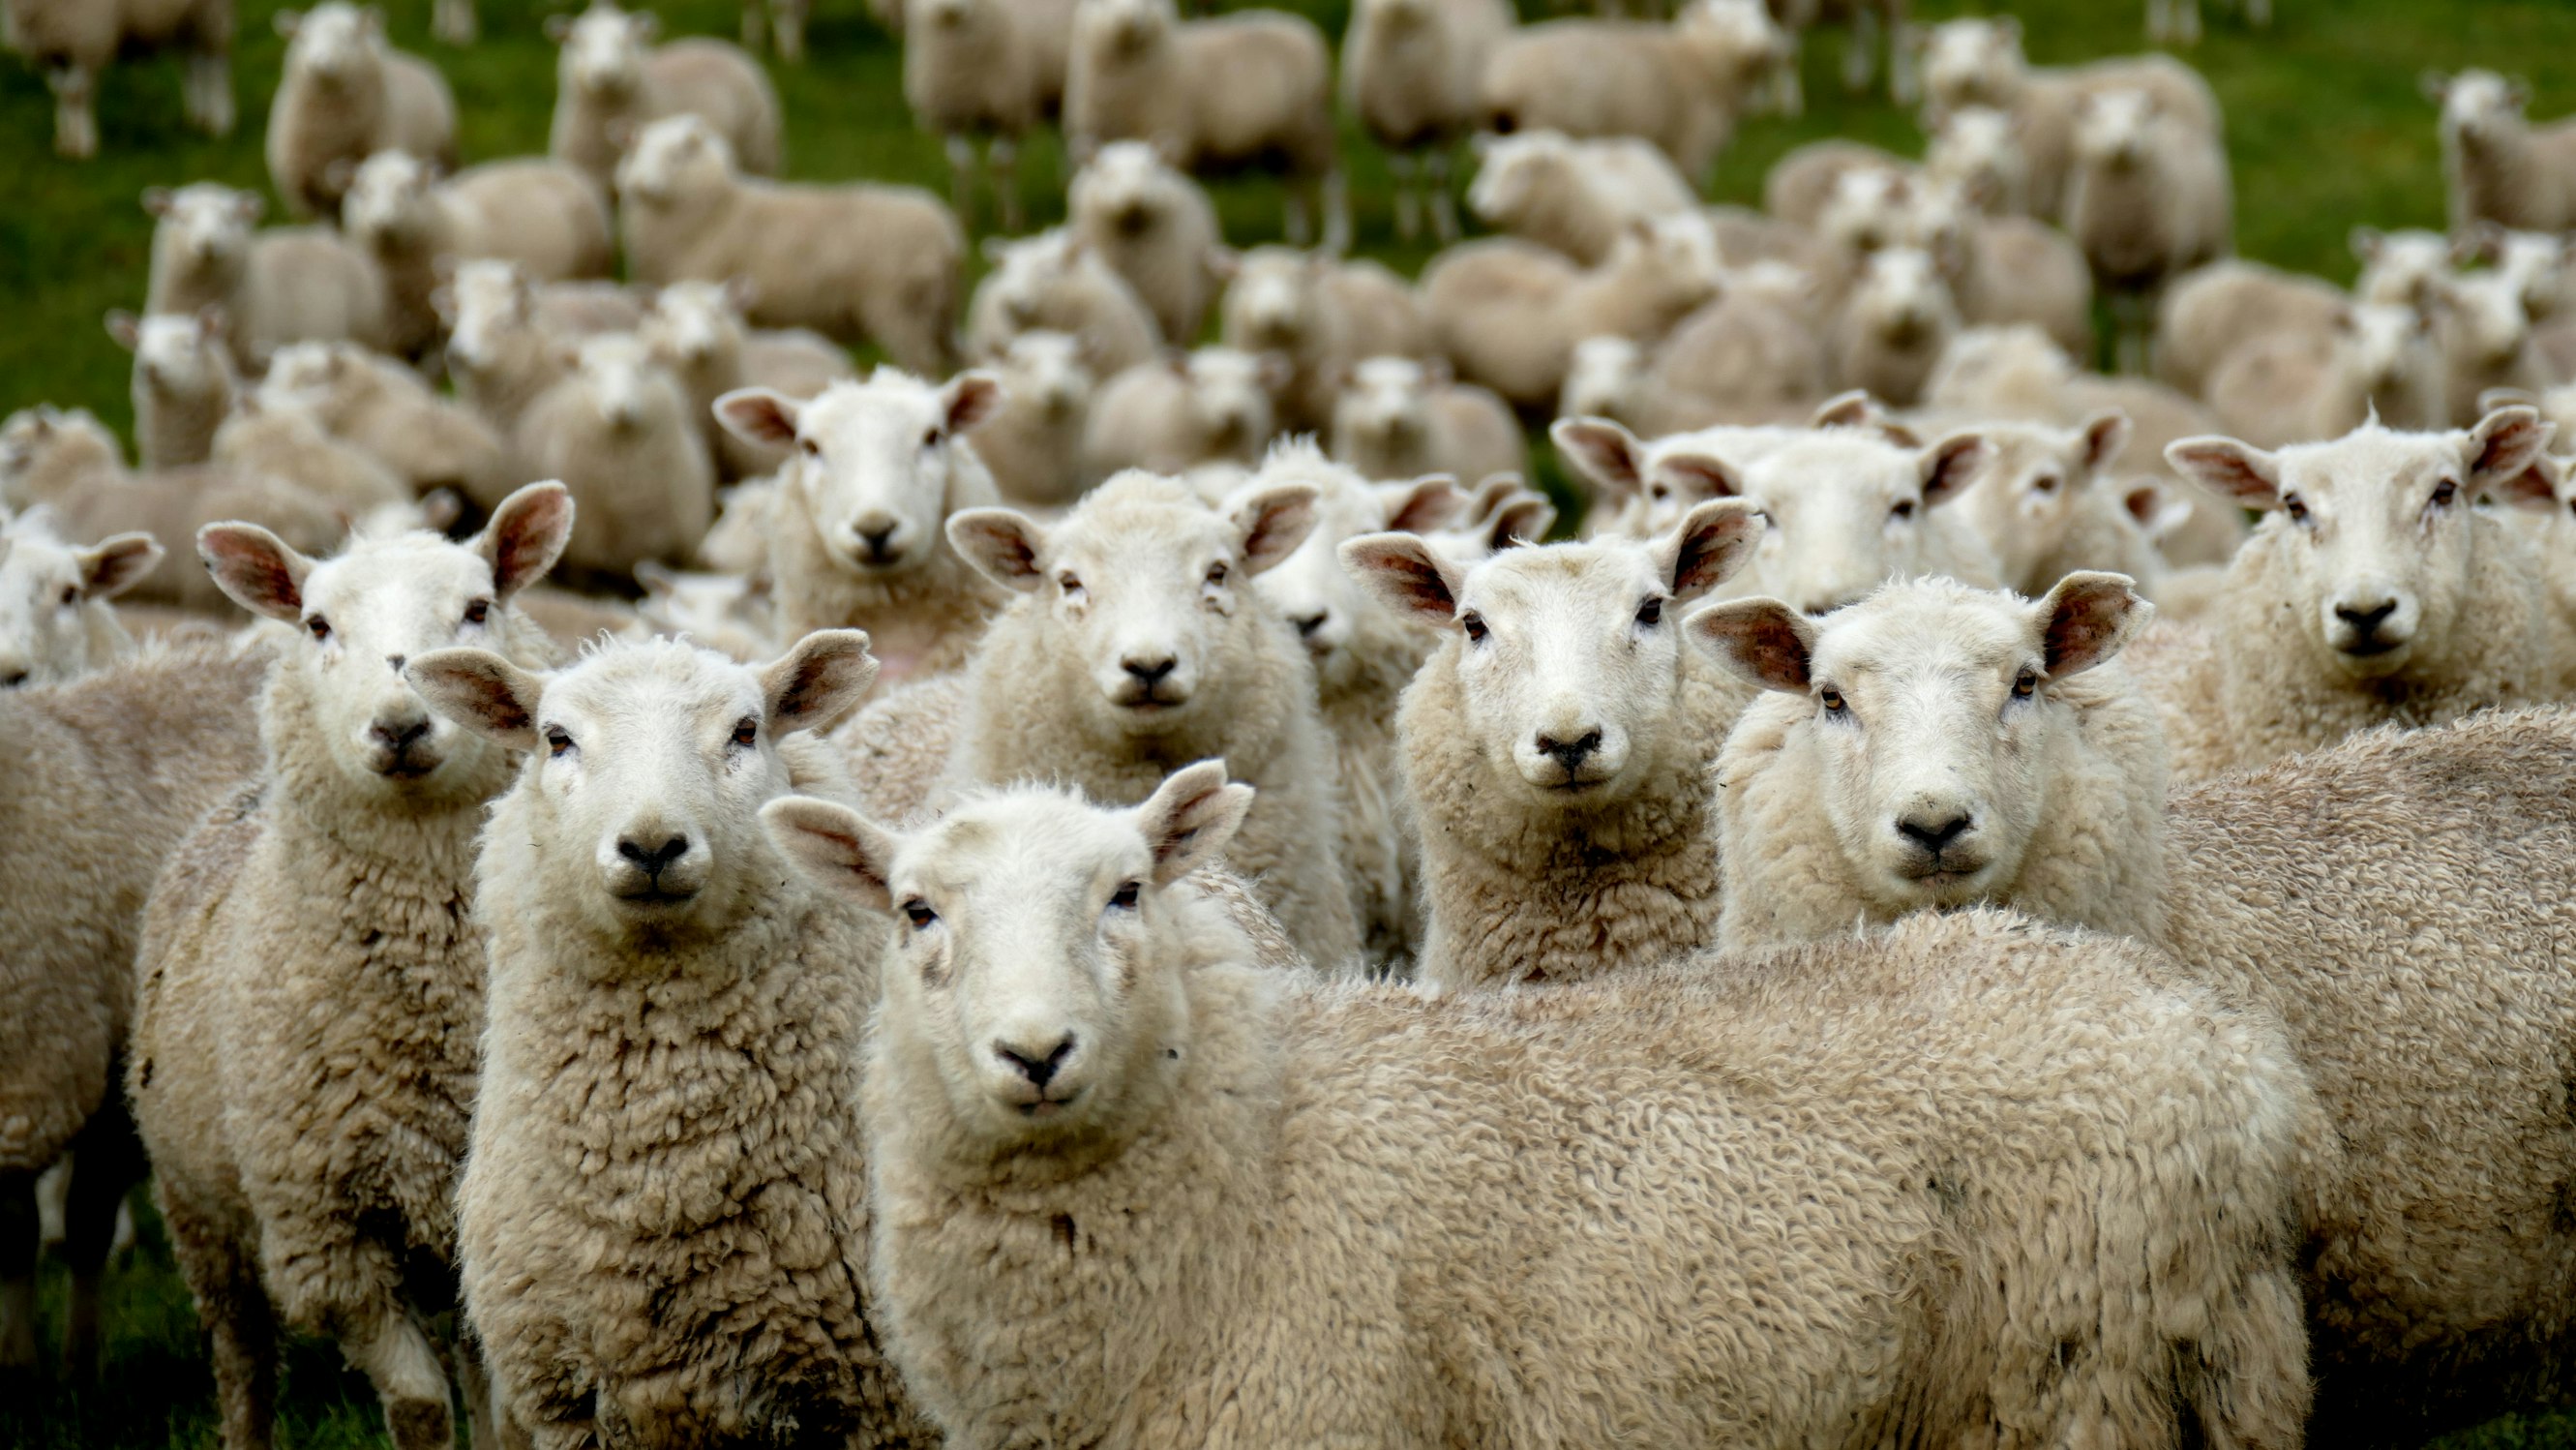 Herd mentality: flock of Sheep Southland New Zealand